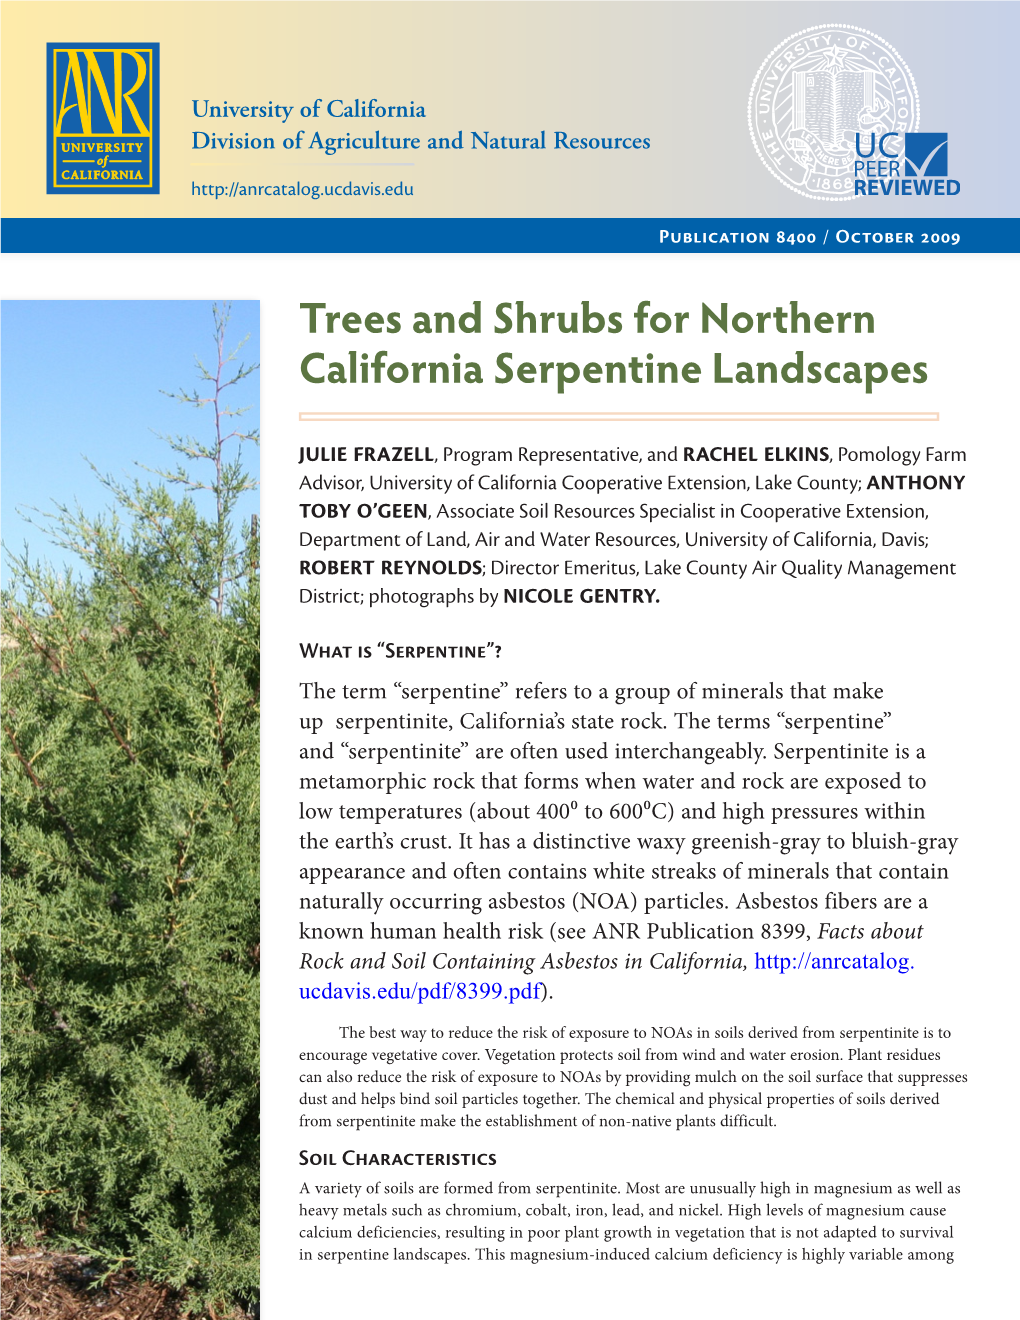 Trees and Shrubs for Northern California Serpentine Landscapes